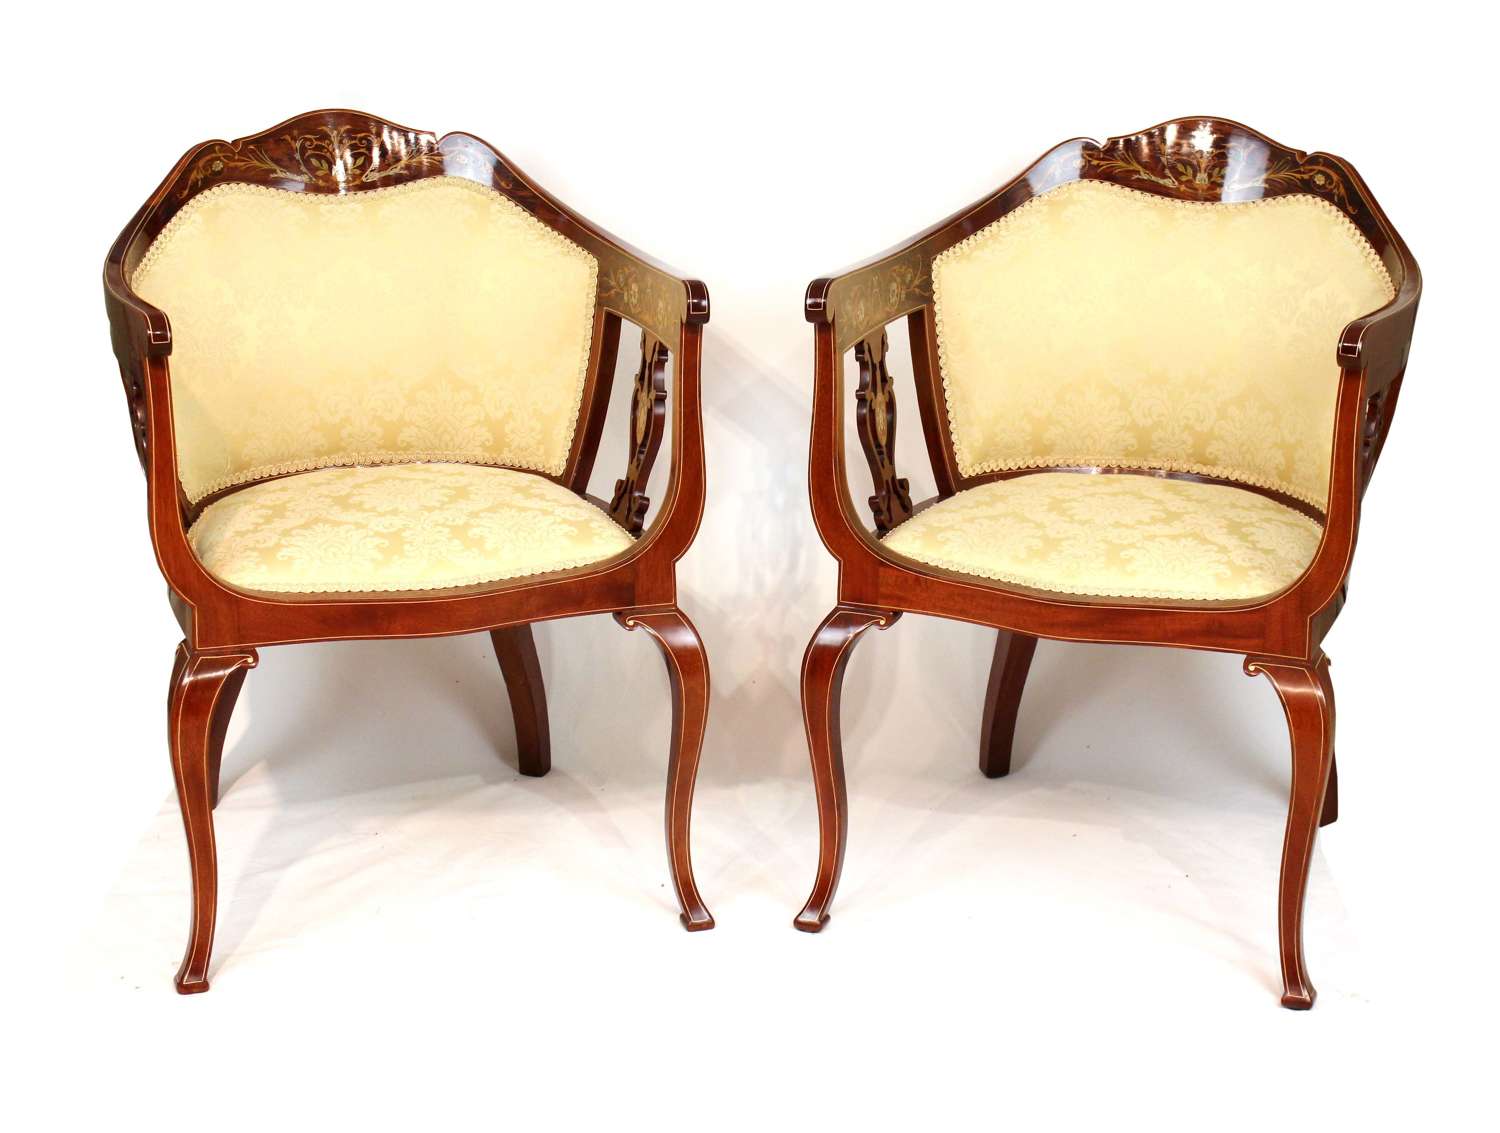 A Quality Pair of Late Victorian Mahogany Inlaid Tub Chairs